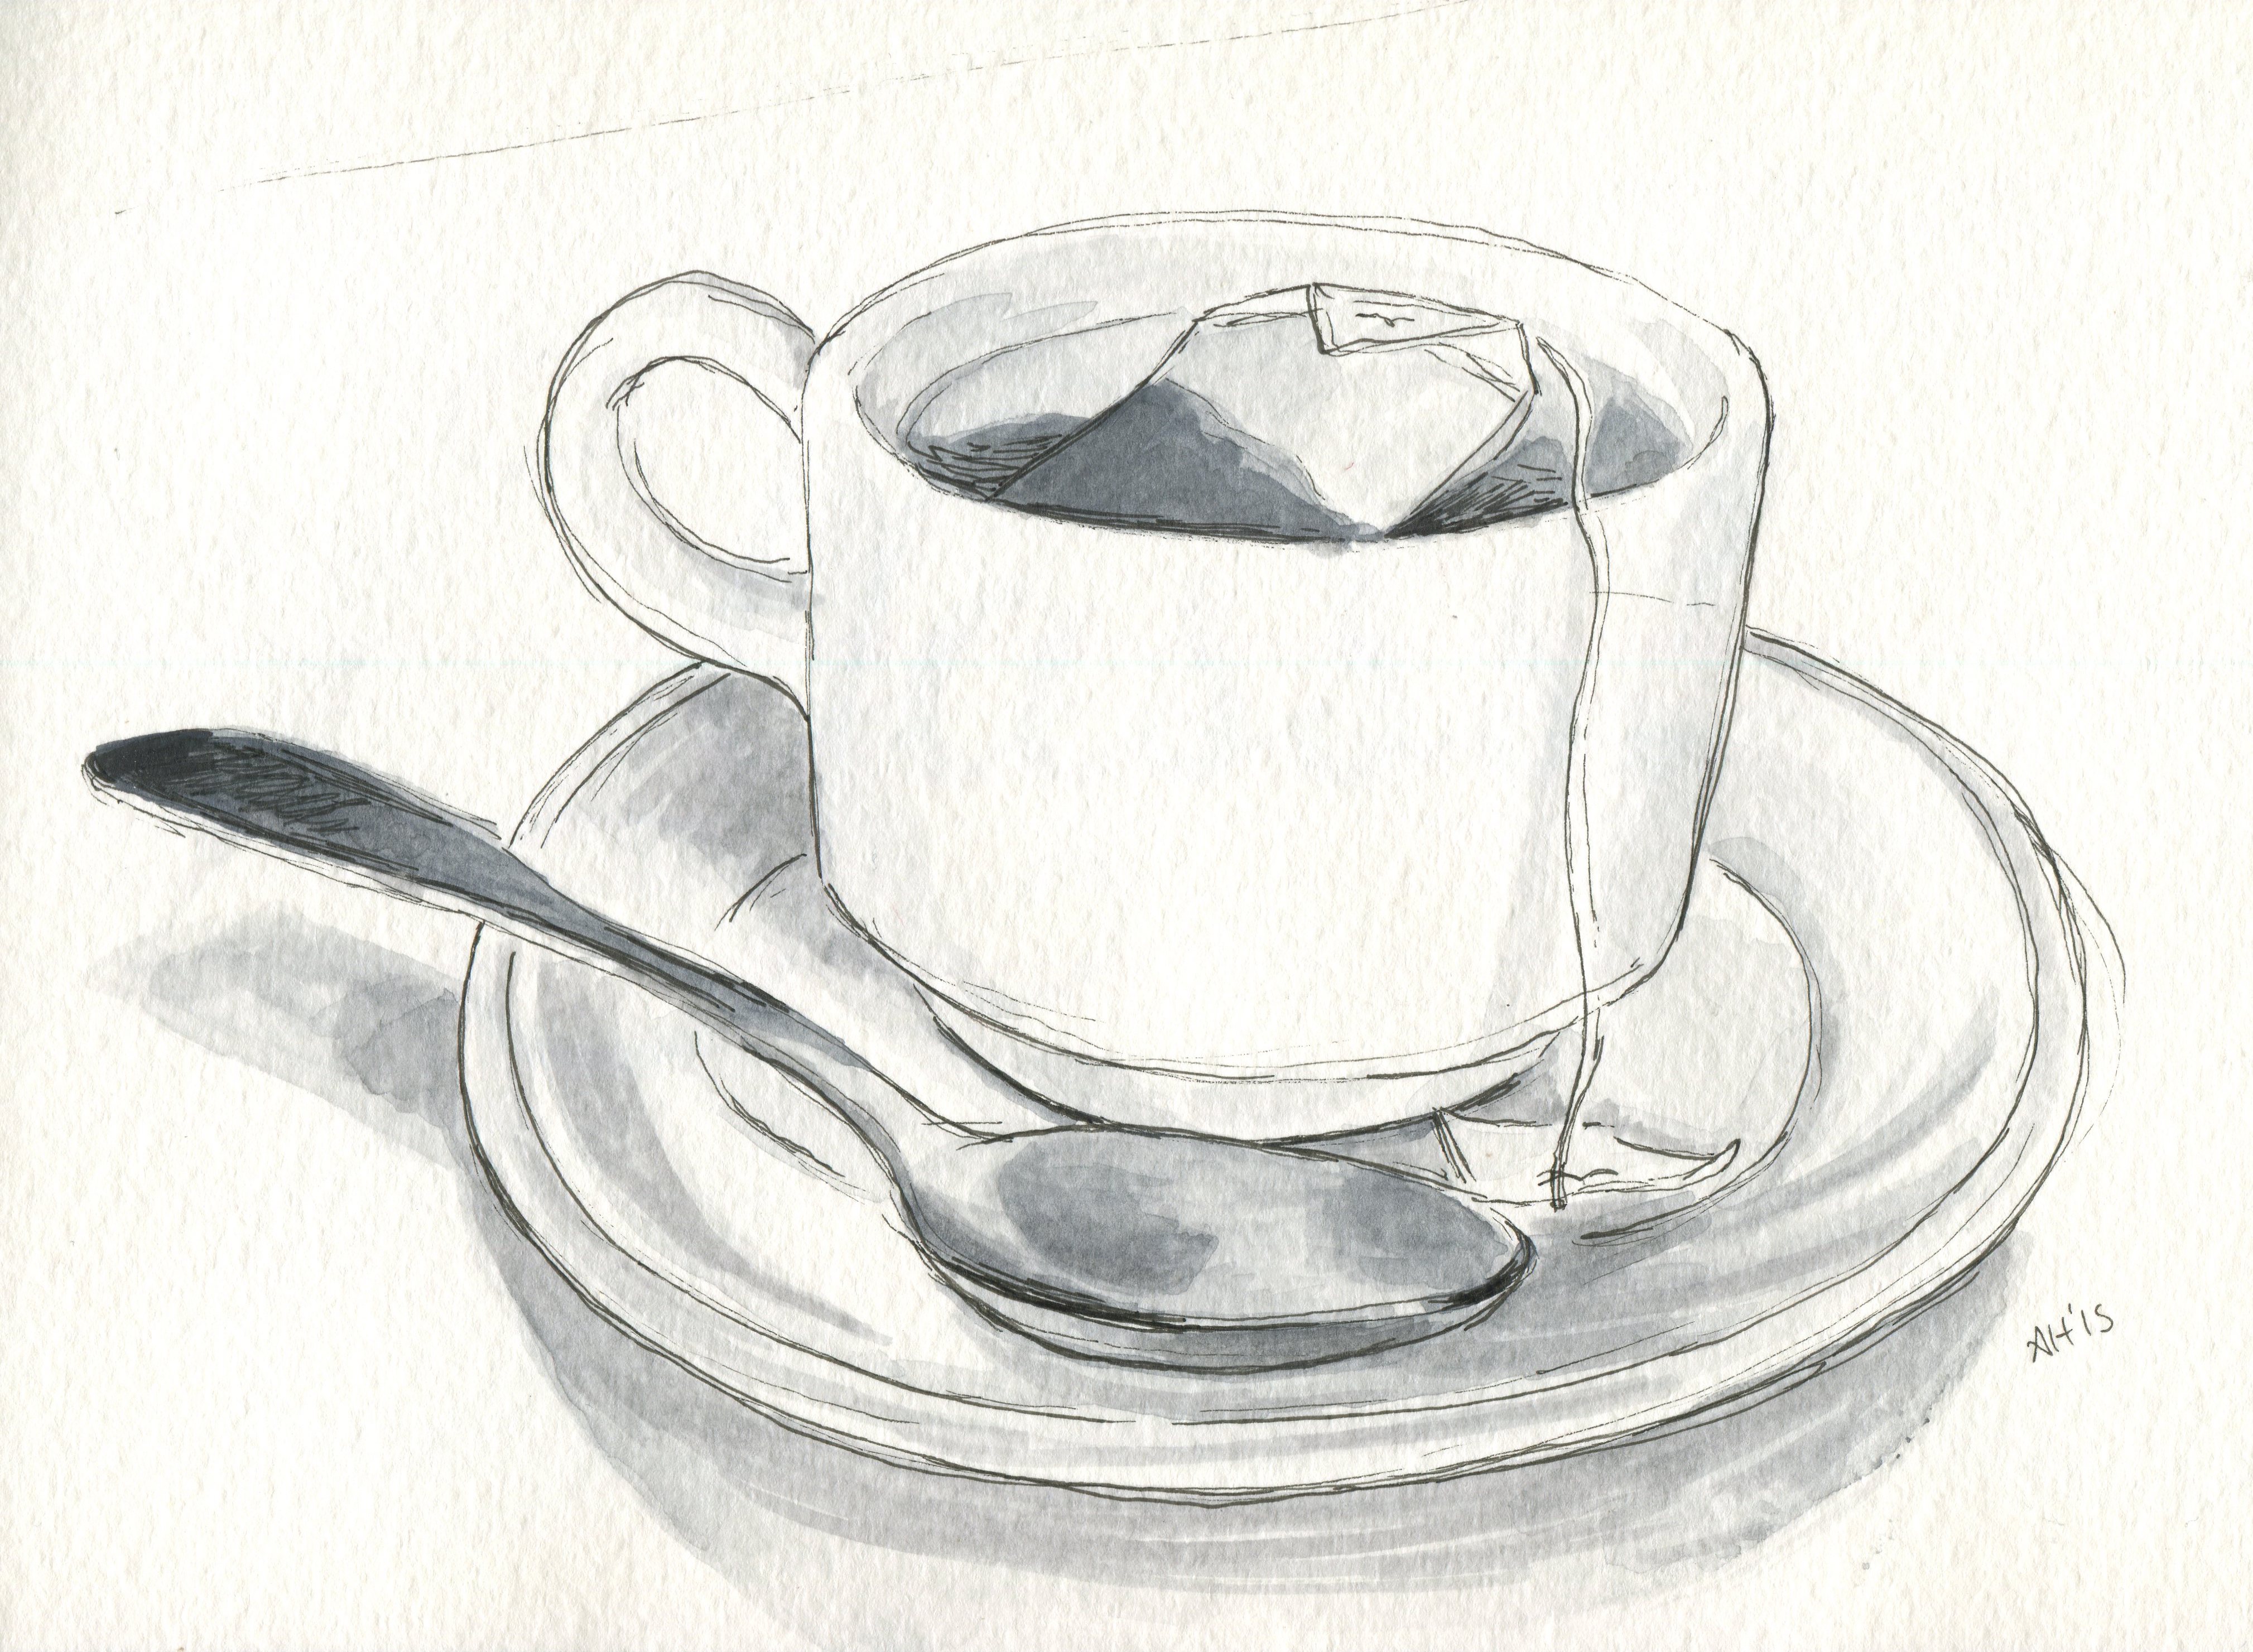 a cup of tea at the diner sketched by alleanna harris